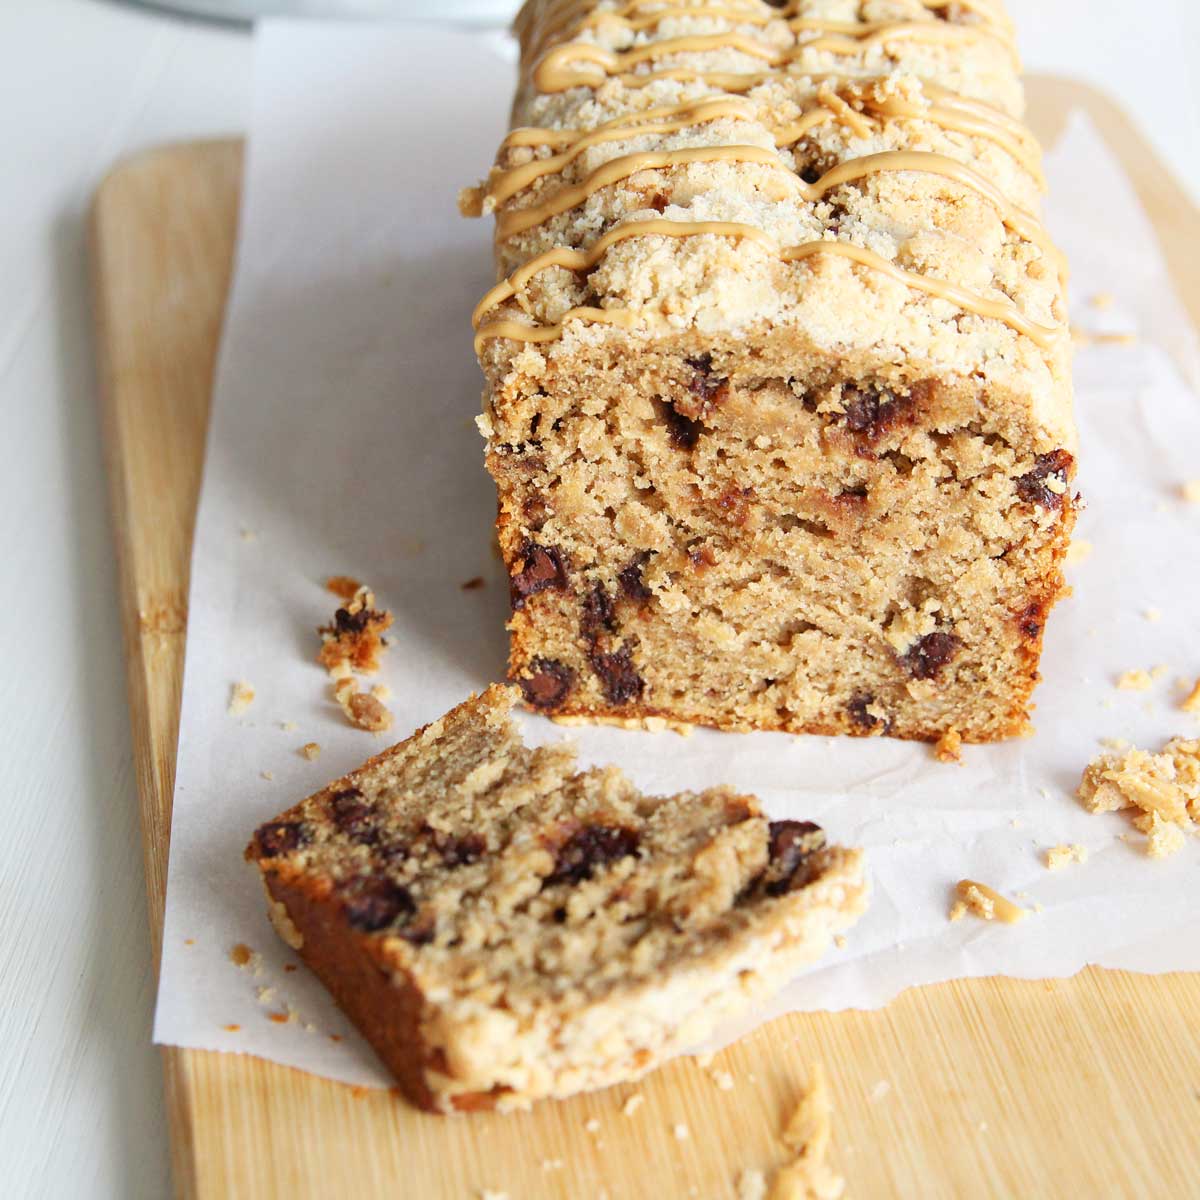 Coffee Lover's Chocolate Chip Banana Bread (No Eggs, Butter, or Dairy) - Frosting